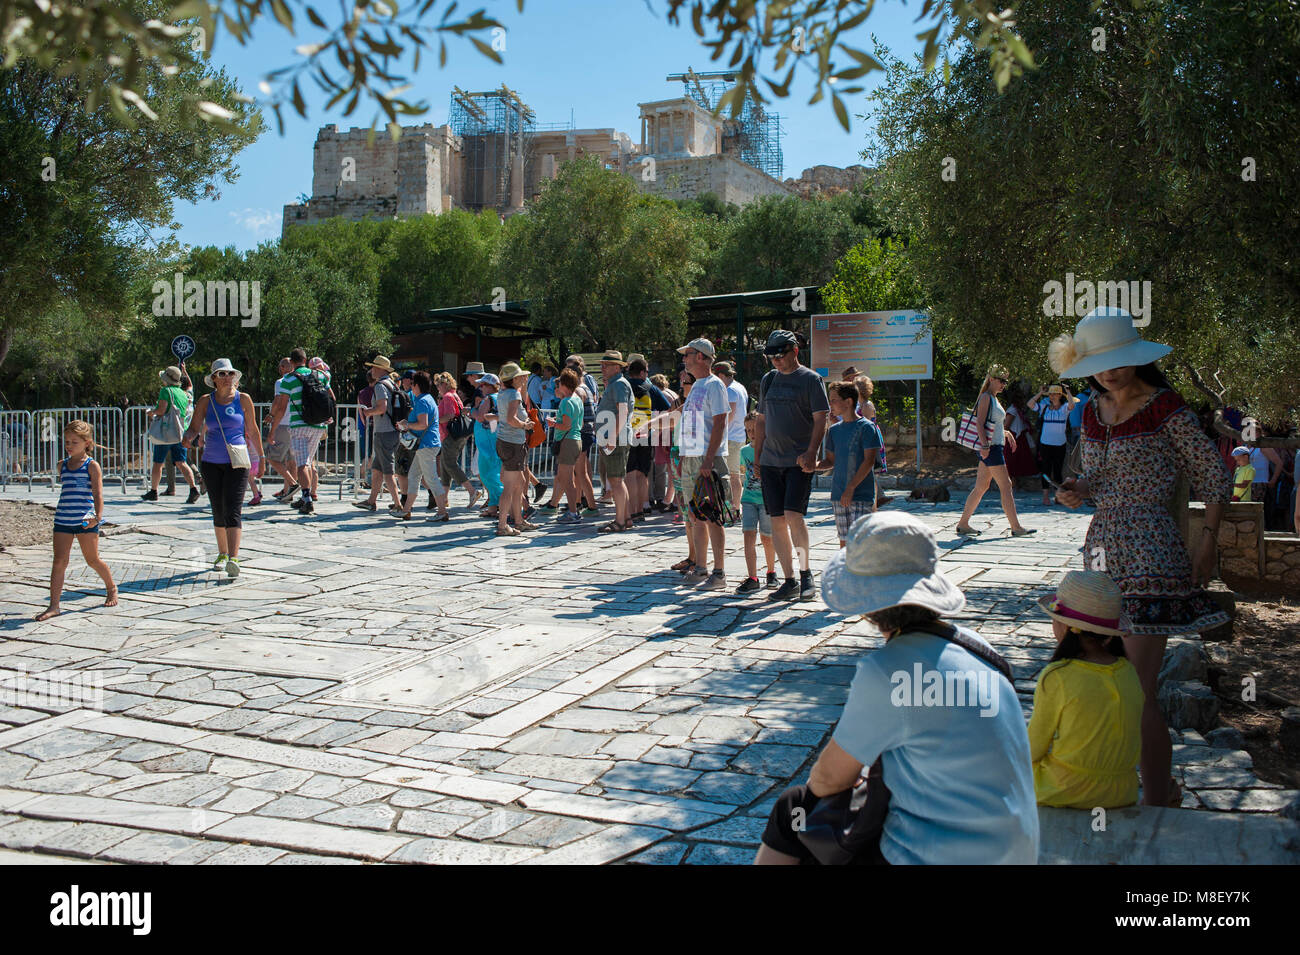 Athens. Tourists visiting Akropolis archeological site. Greece. Stock Photo